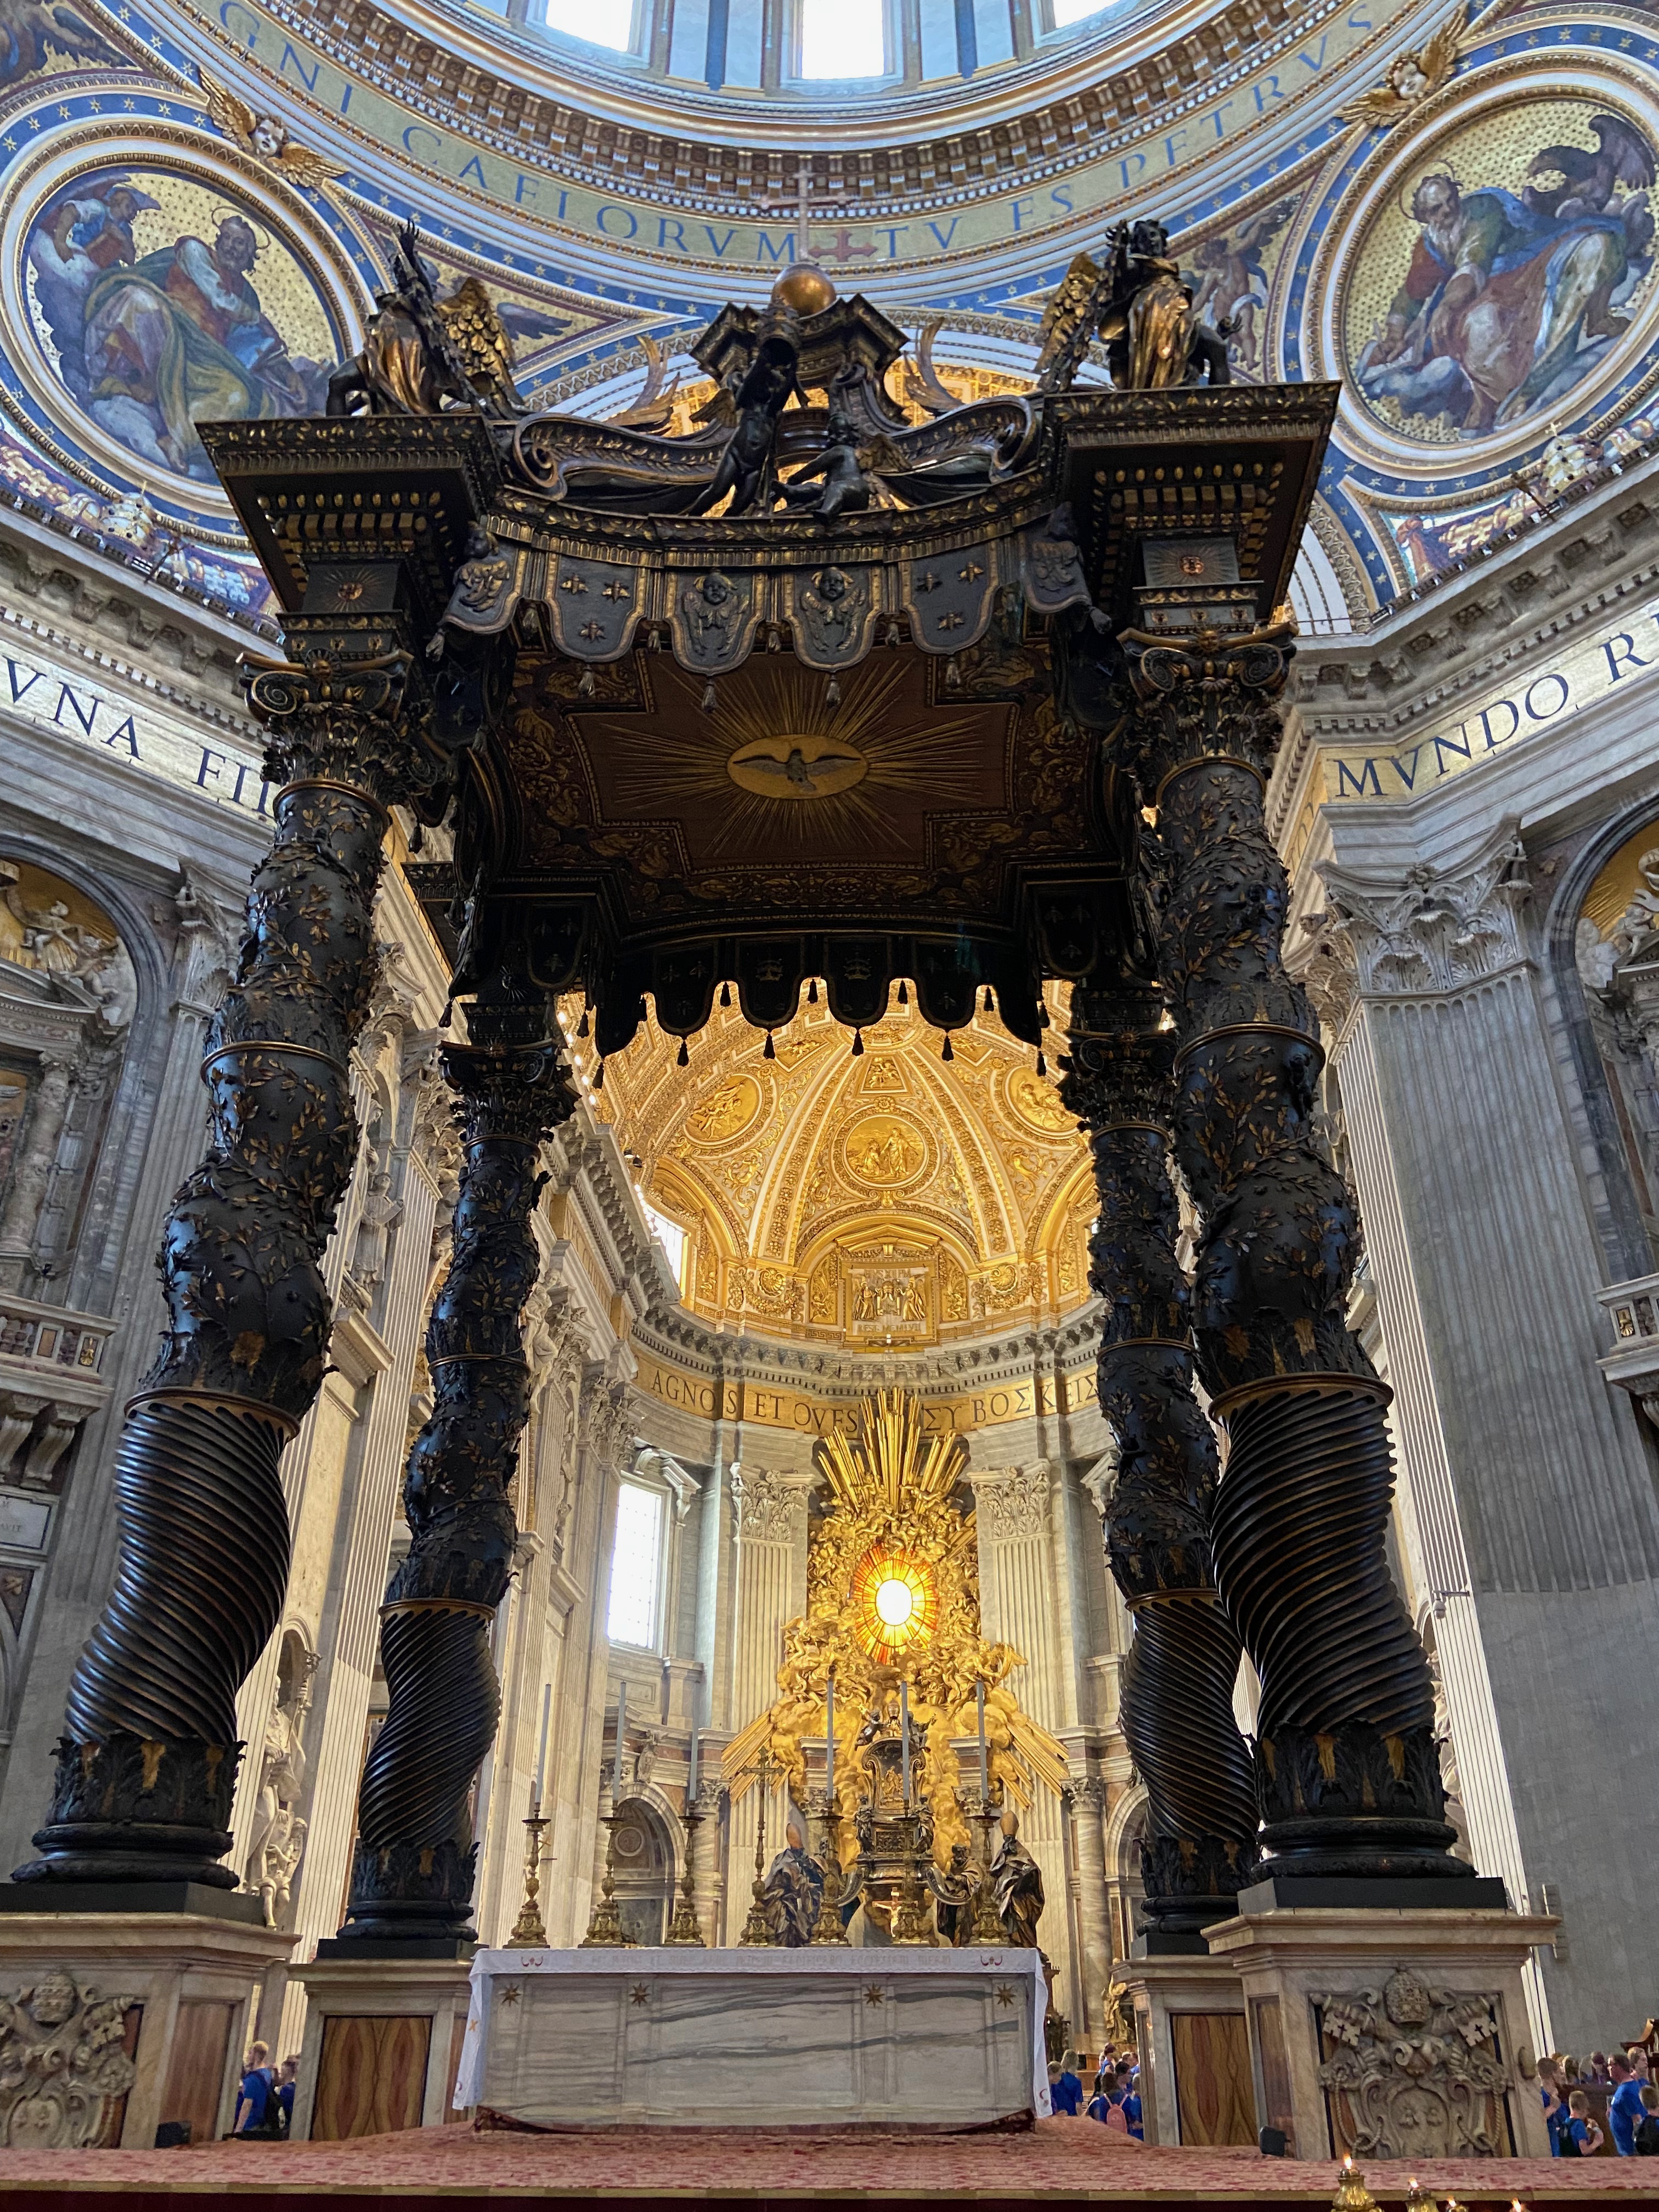 A closer view of the altar of St. Peter's Basilica.